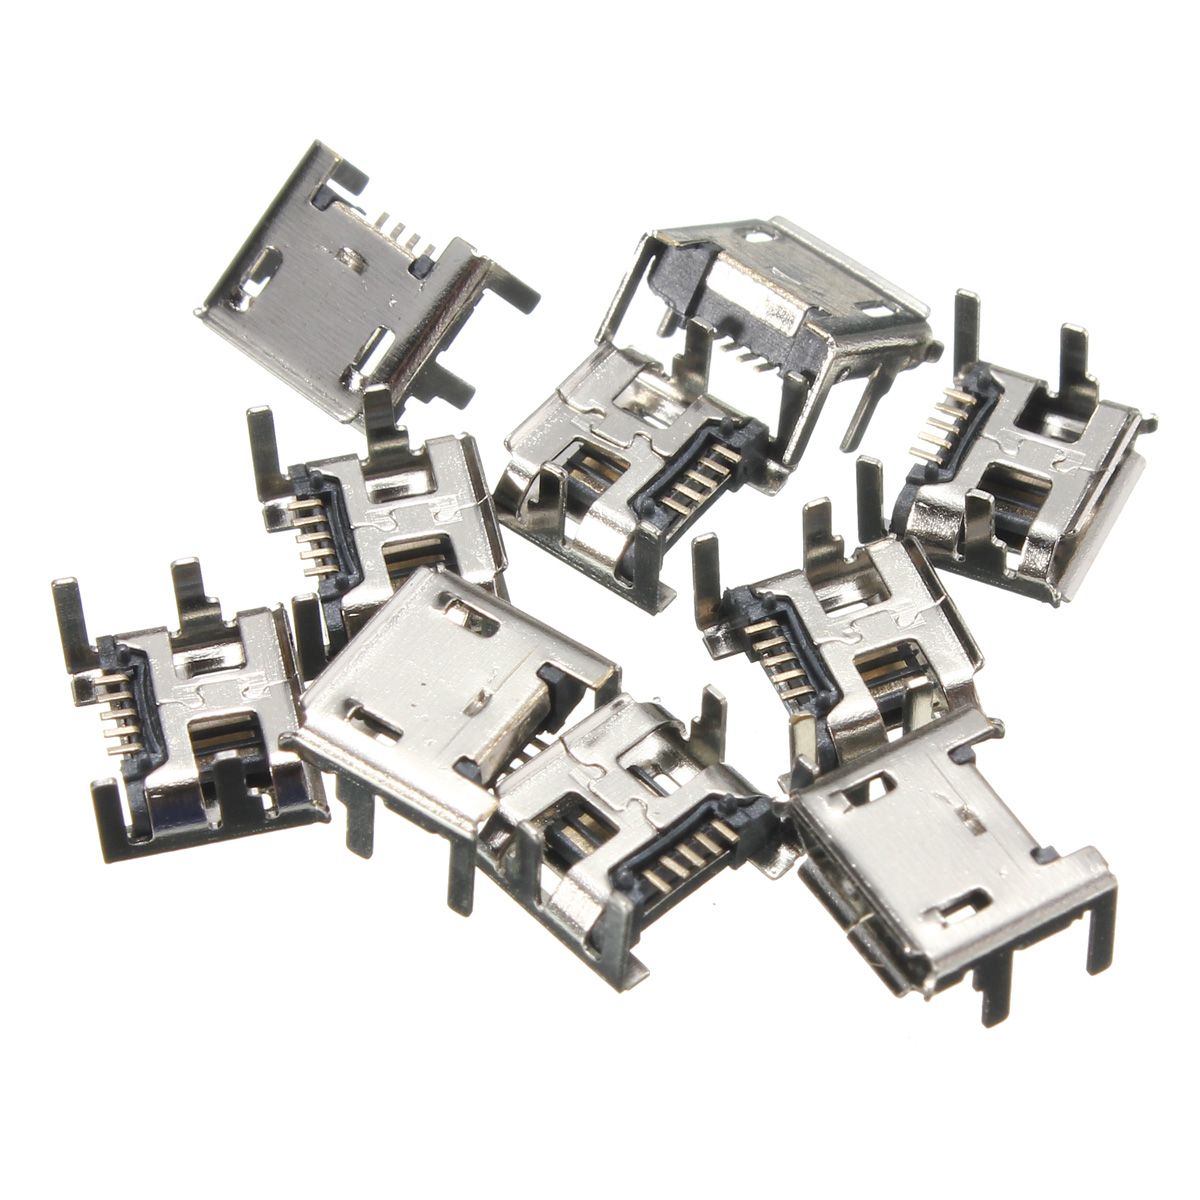 50pcs-Micro-USB-Type-B-5-Pin-Female-Socket-4-Vertical-Legs-For-Solder-Connector-1370525